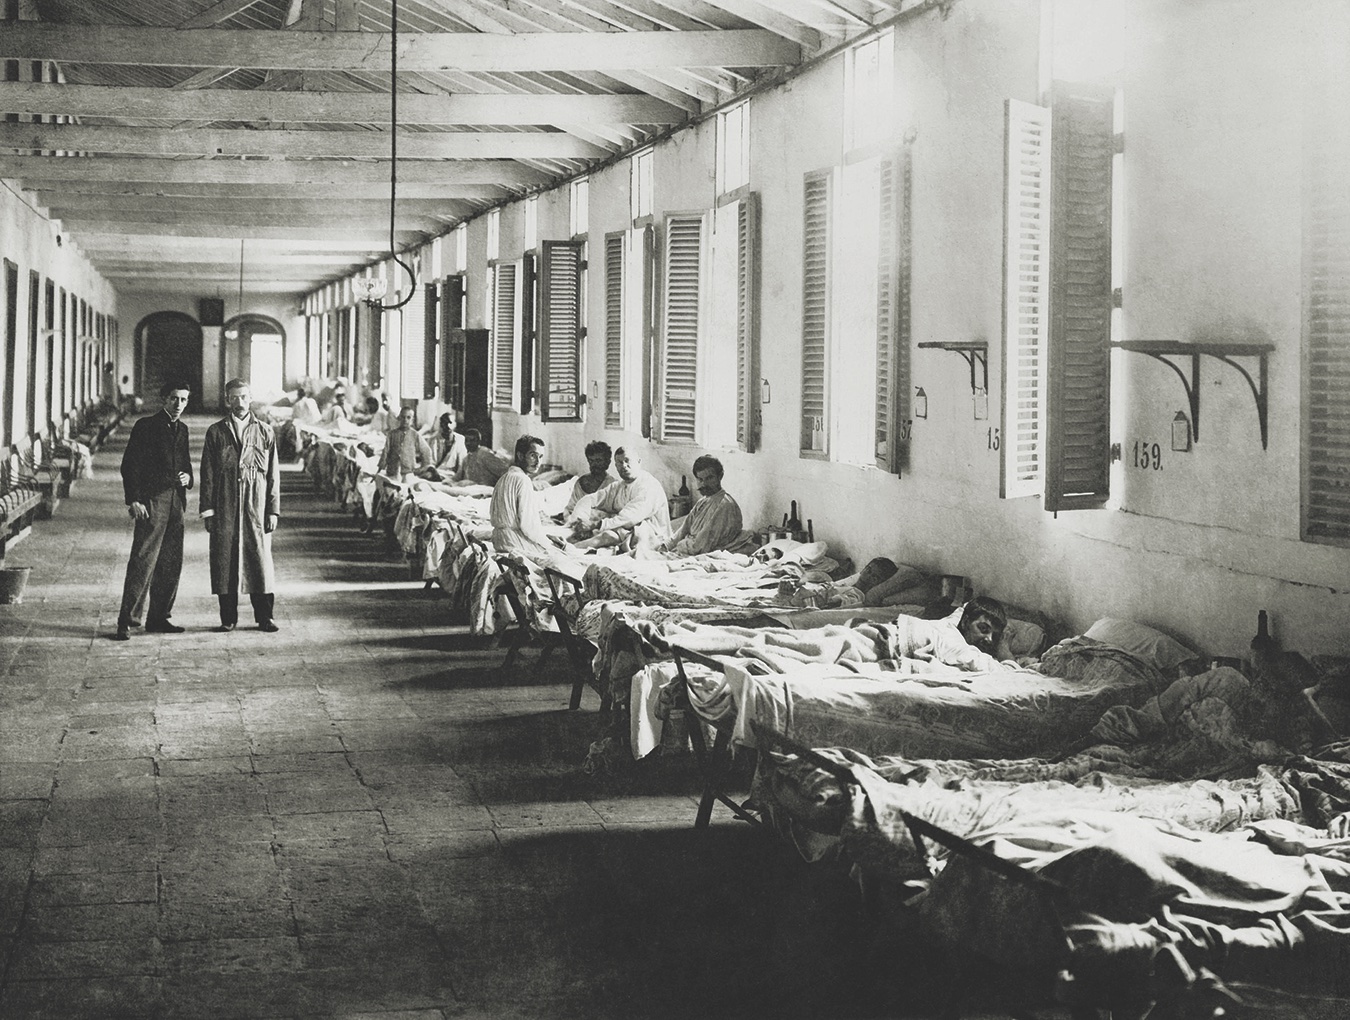 The men’s ward of a yellow fever hospital in Havana in 1899. (Everett Collection Historical/Alamy Stock Photo)